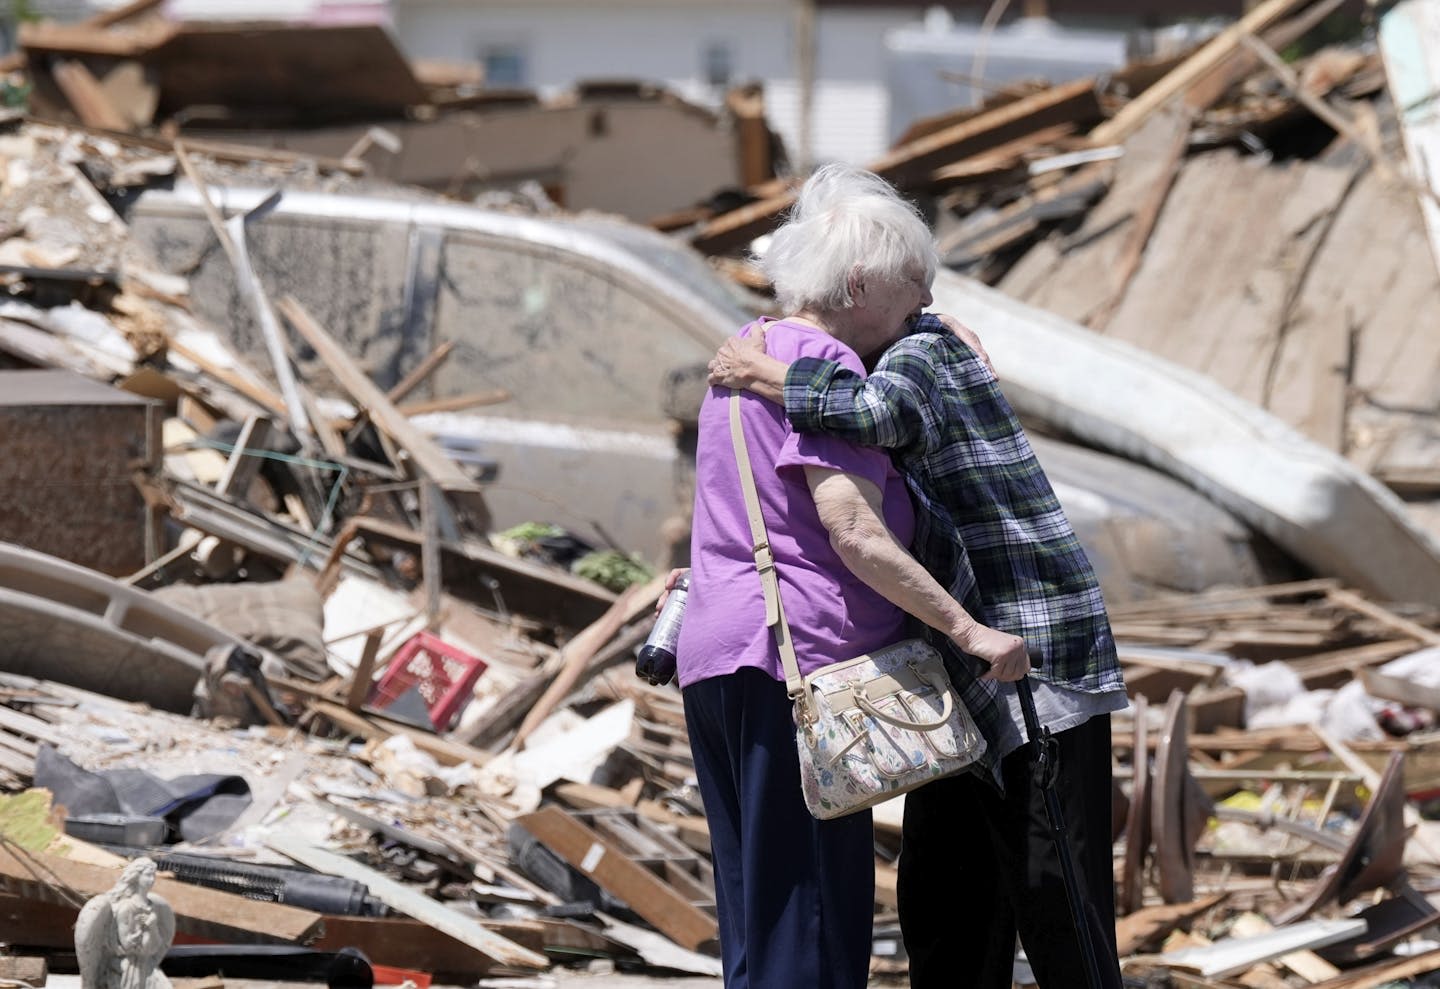 Who is displaced by tornadoes, wildfires and other disasters tells a story of vulnerability and recovery in America